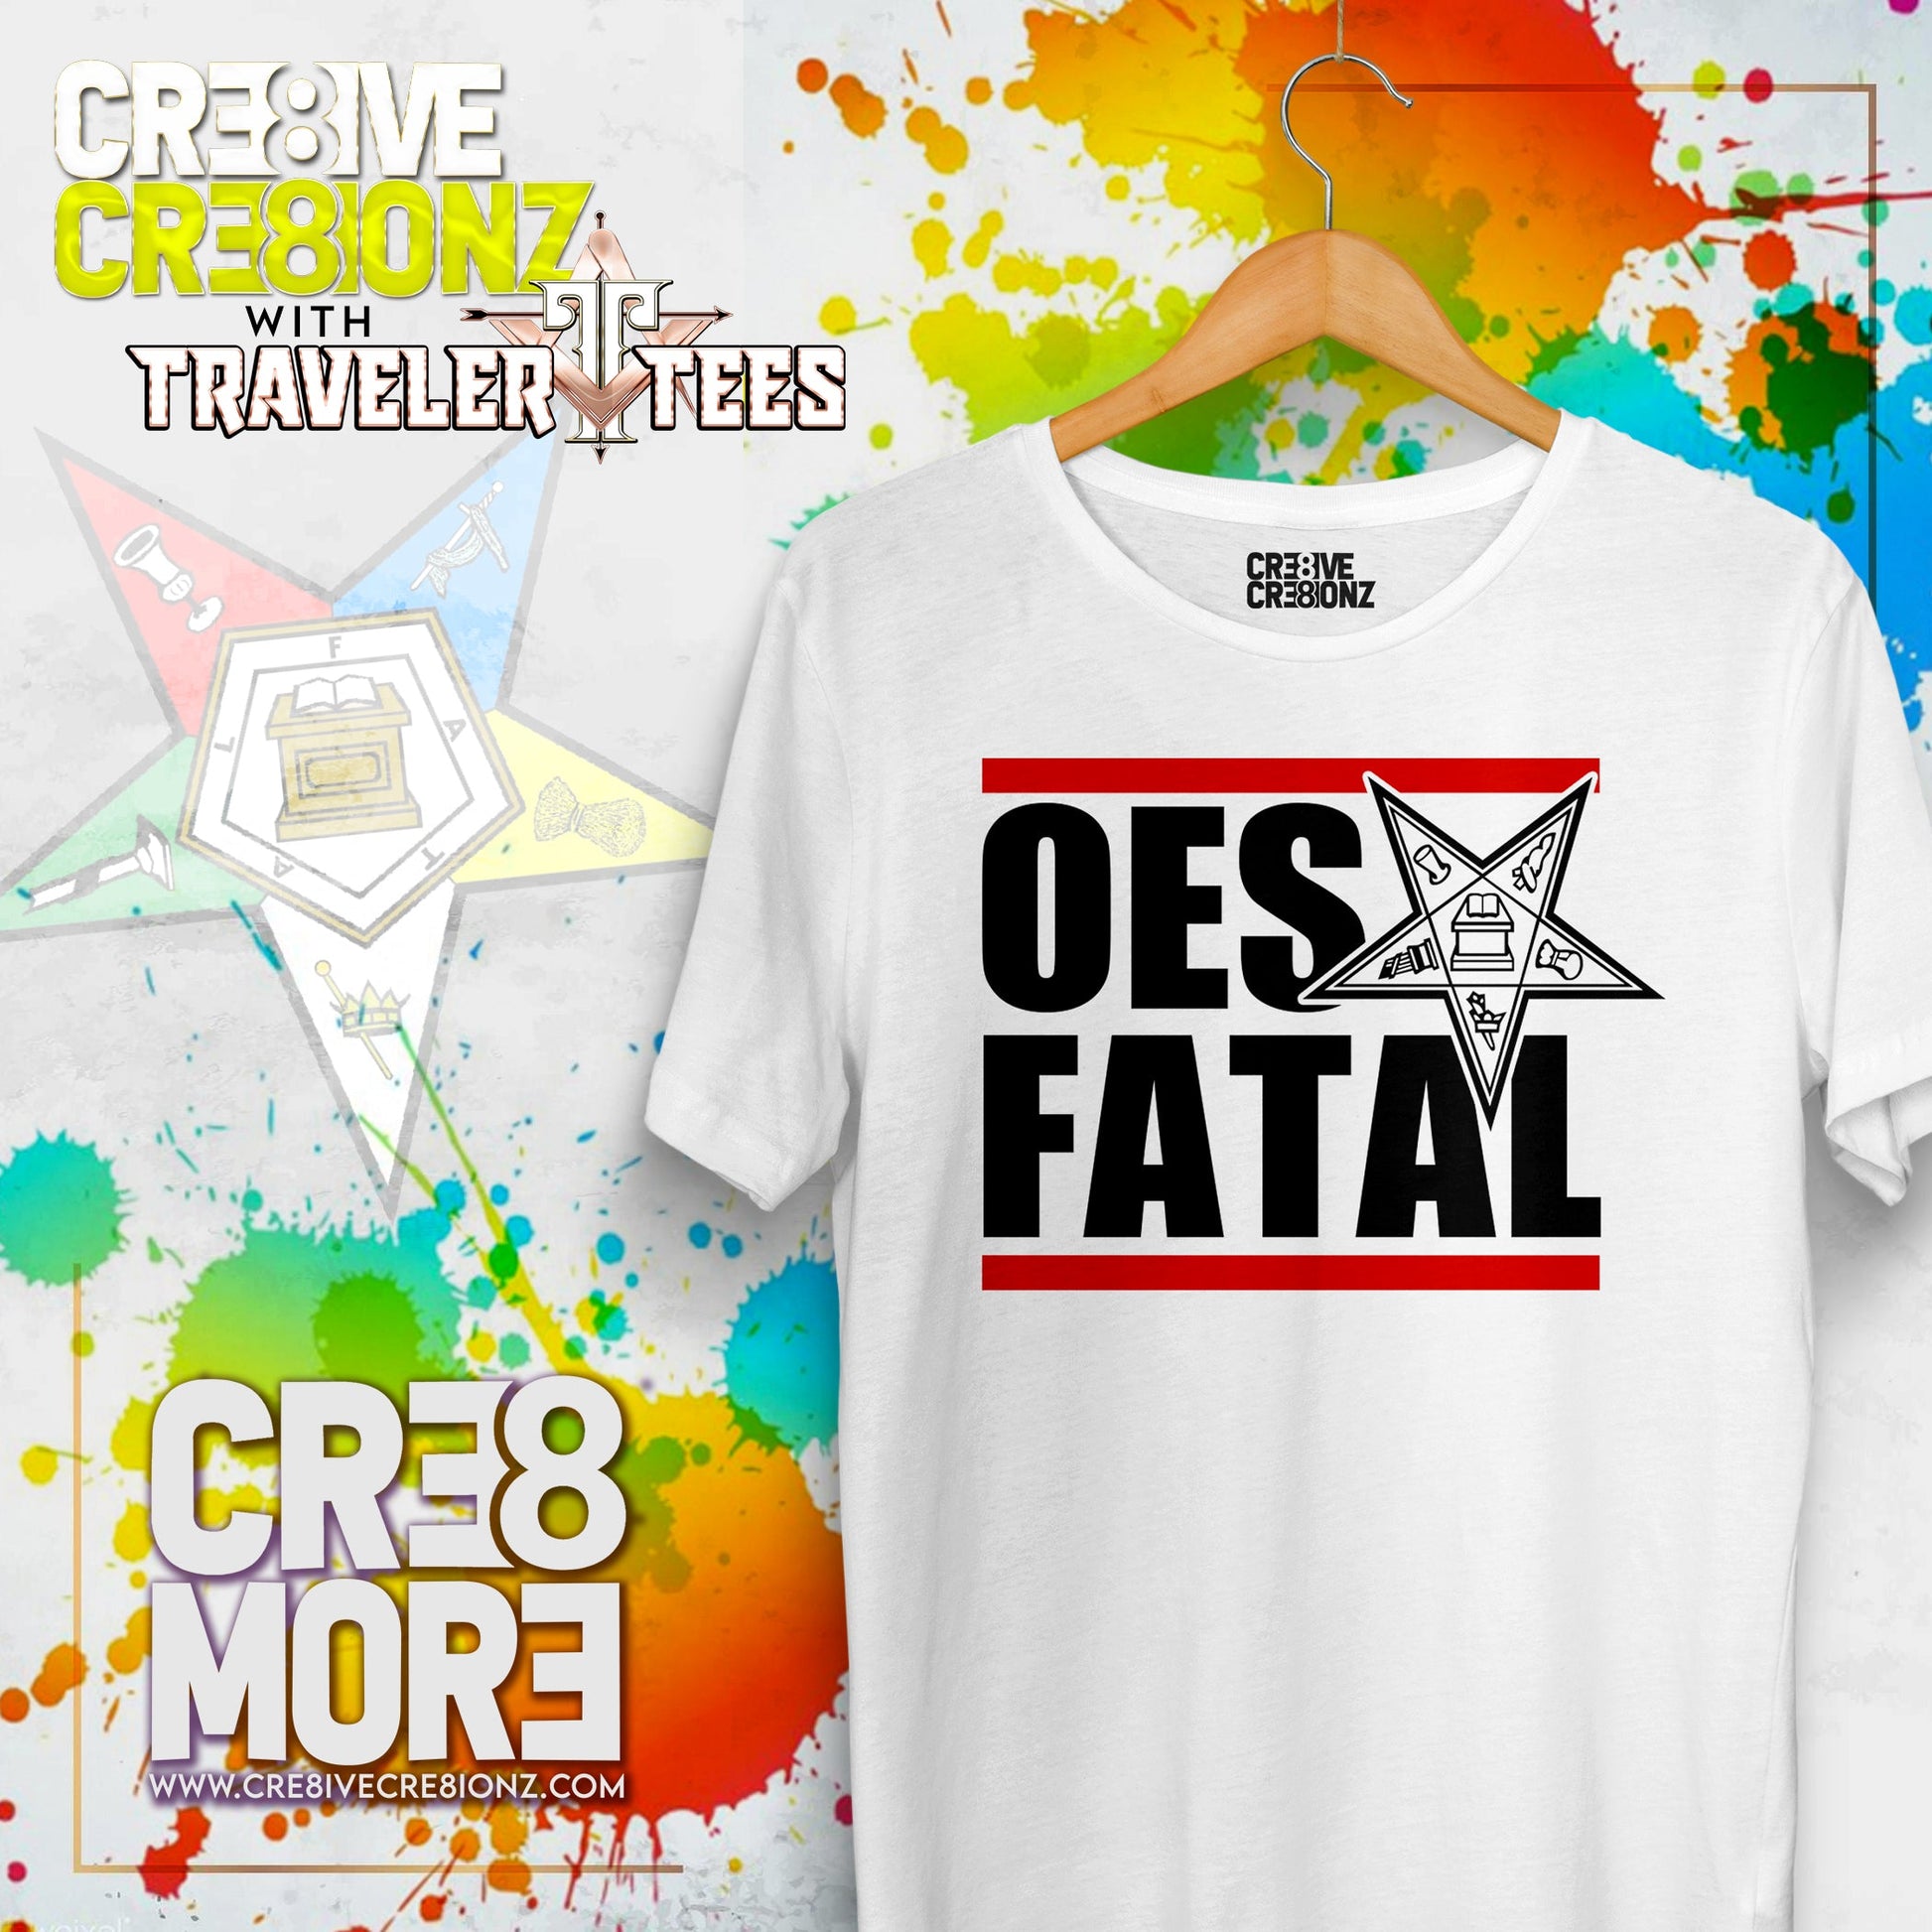 OES FATAL Shirt - Cre8ive Cre8ionz